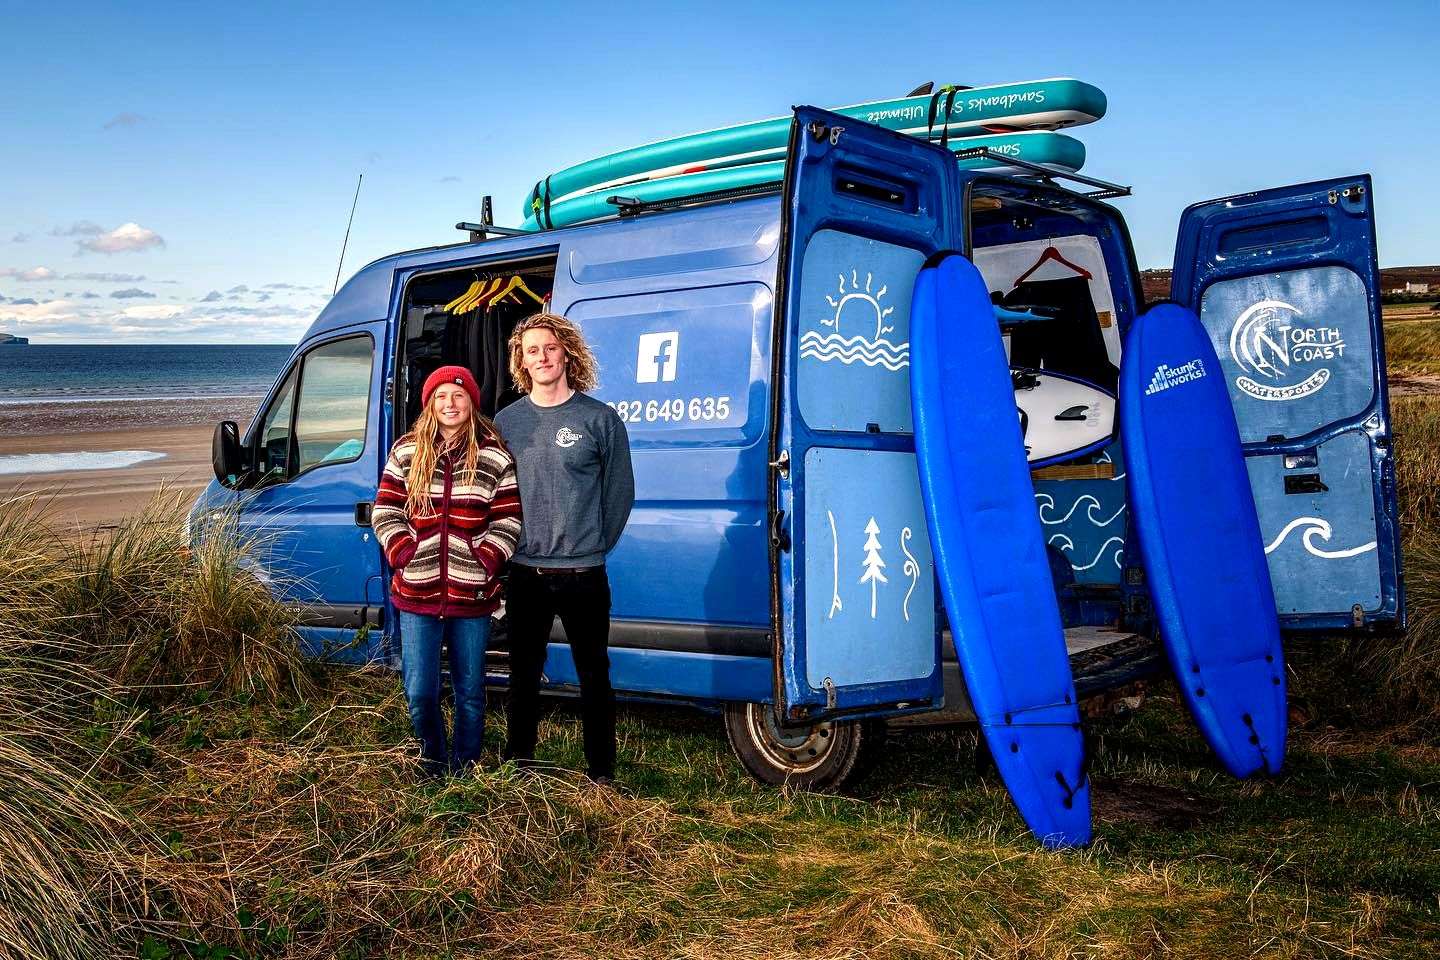 North Coast Watersports in Caithness is among the businesses offering a discount under the scheme.